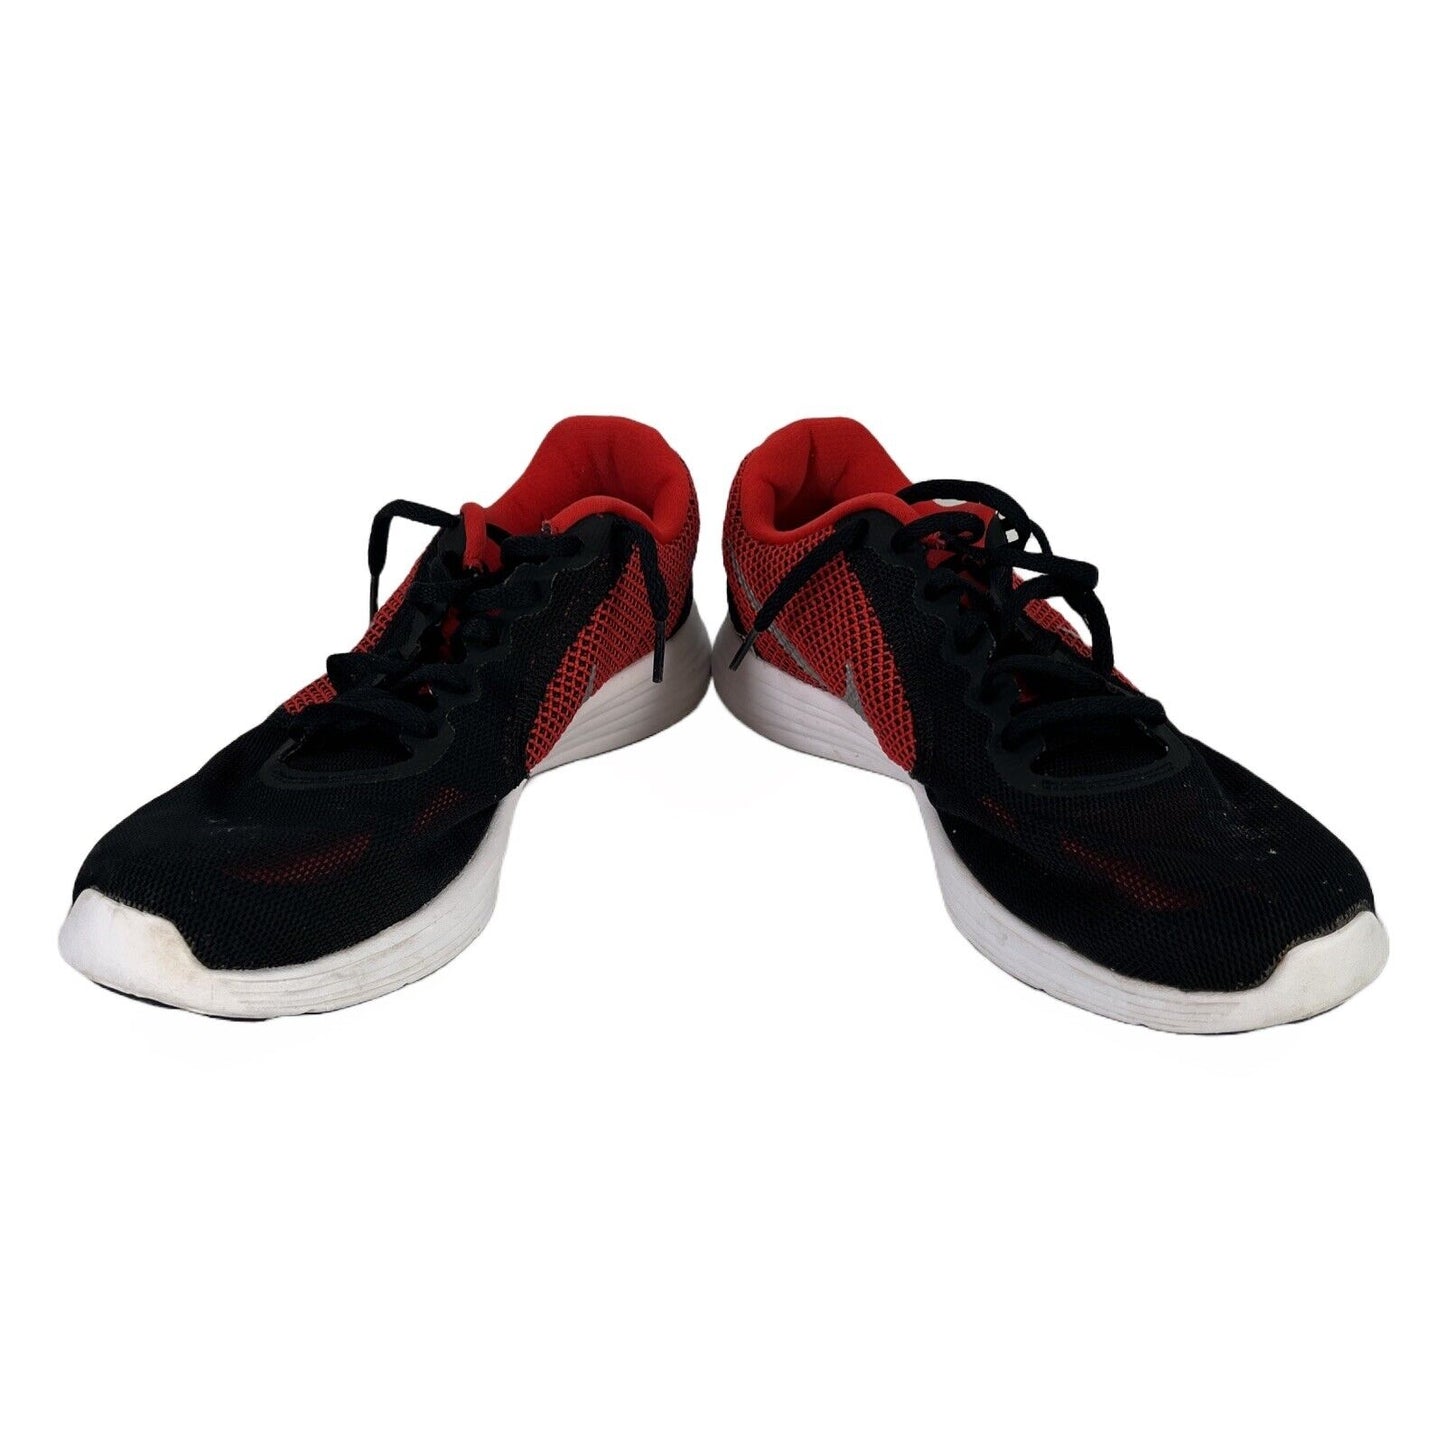 Nike Mens Black/Red Revolution 3 Revolution Lace Up Athletic Shoes - 10.5